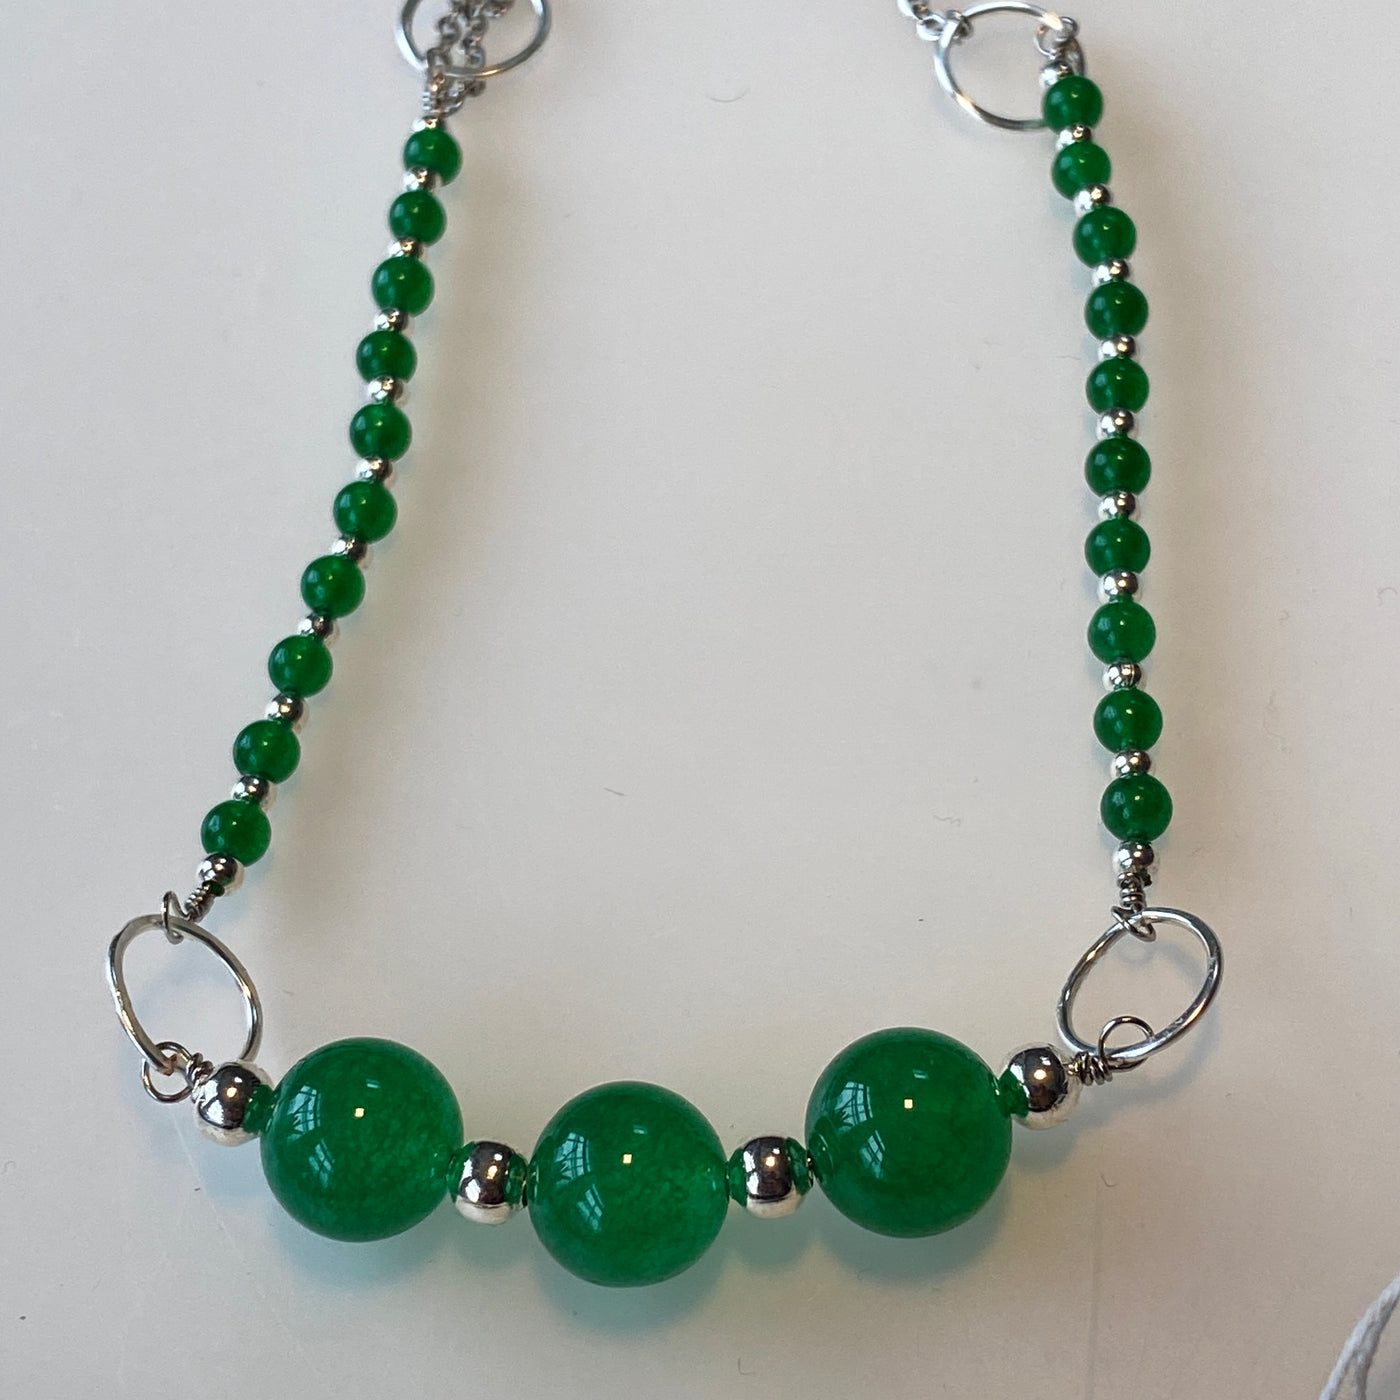 Green chalcedony and silver necklace